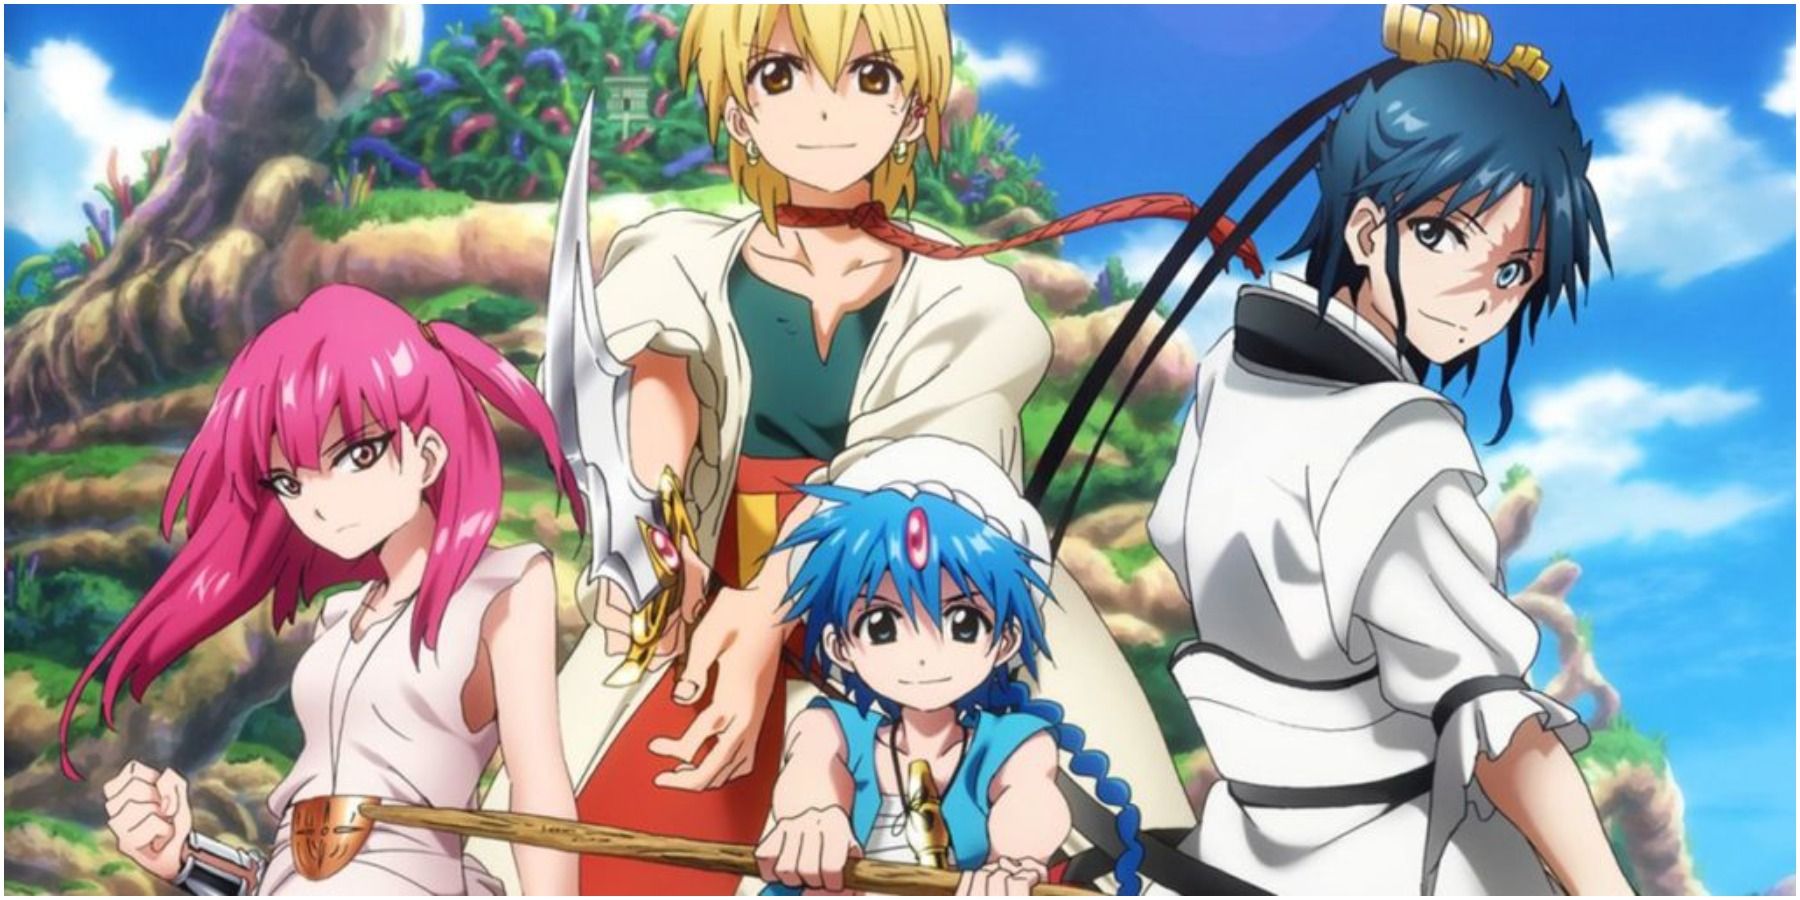 Aladdin & His Friends From Magi: The Labyrinth Of Magic